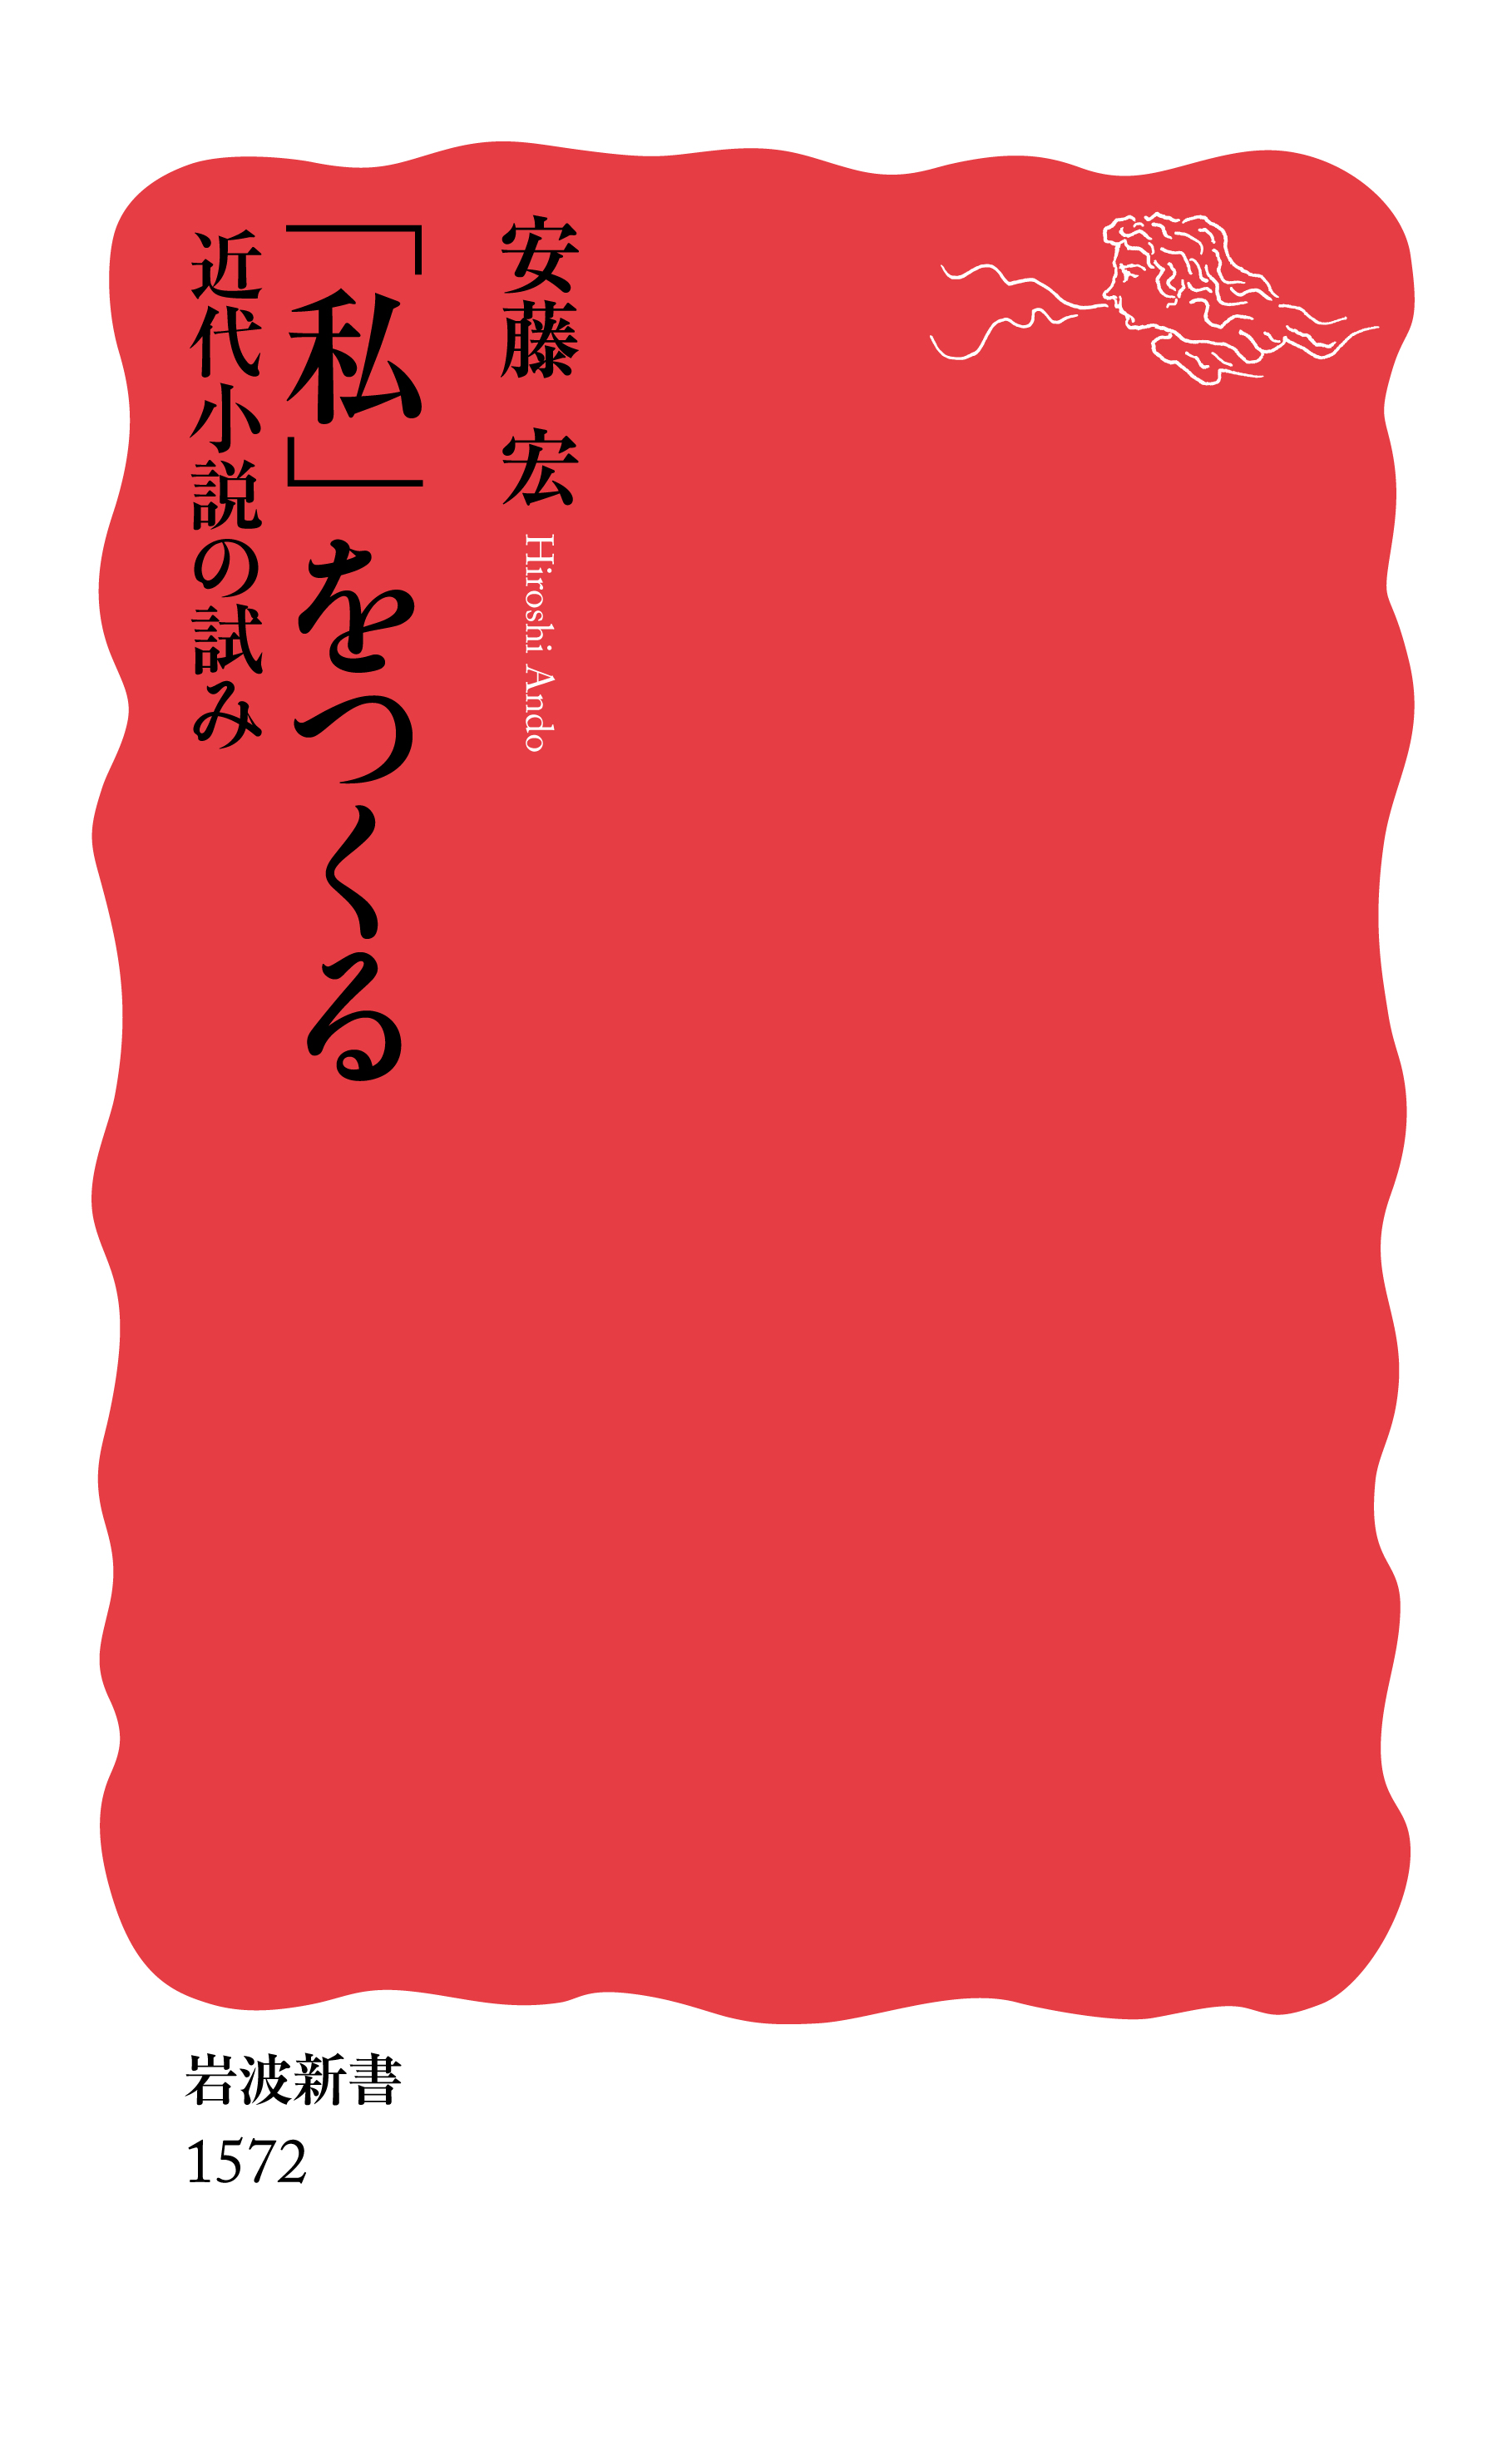 A white cover with red cloud shaped trademark of Iwanami Shinsho